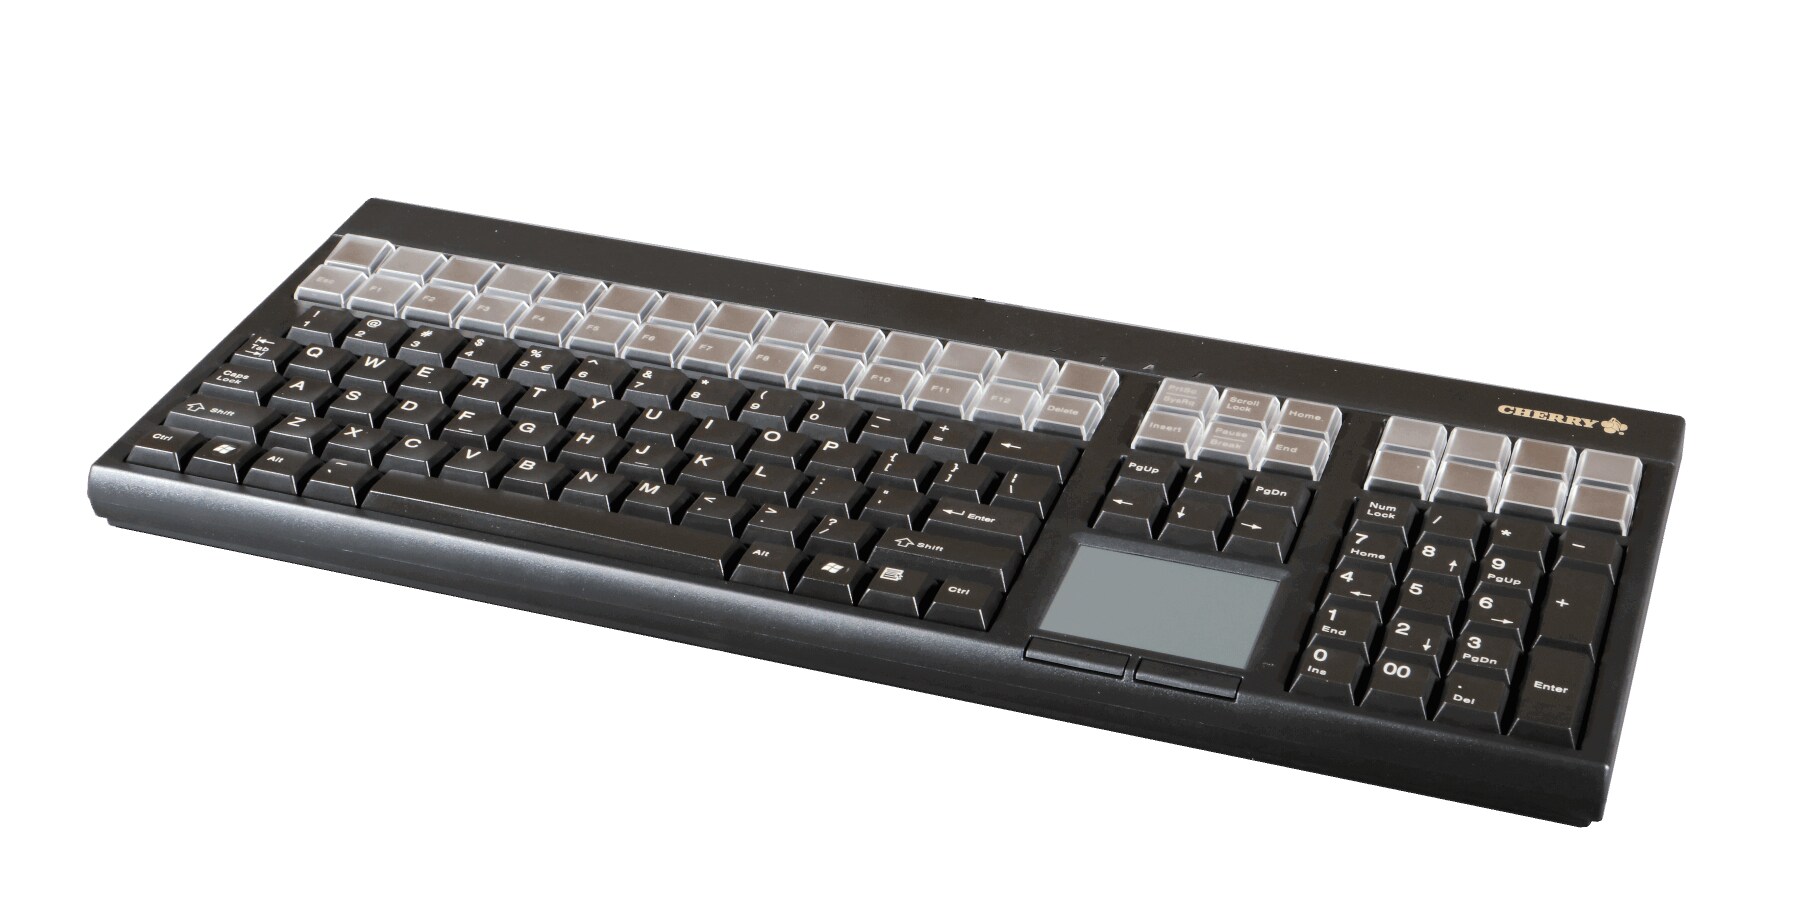 CHERRY Full-Sized Multifunctional Keyboard with Touchpad - Black